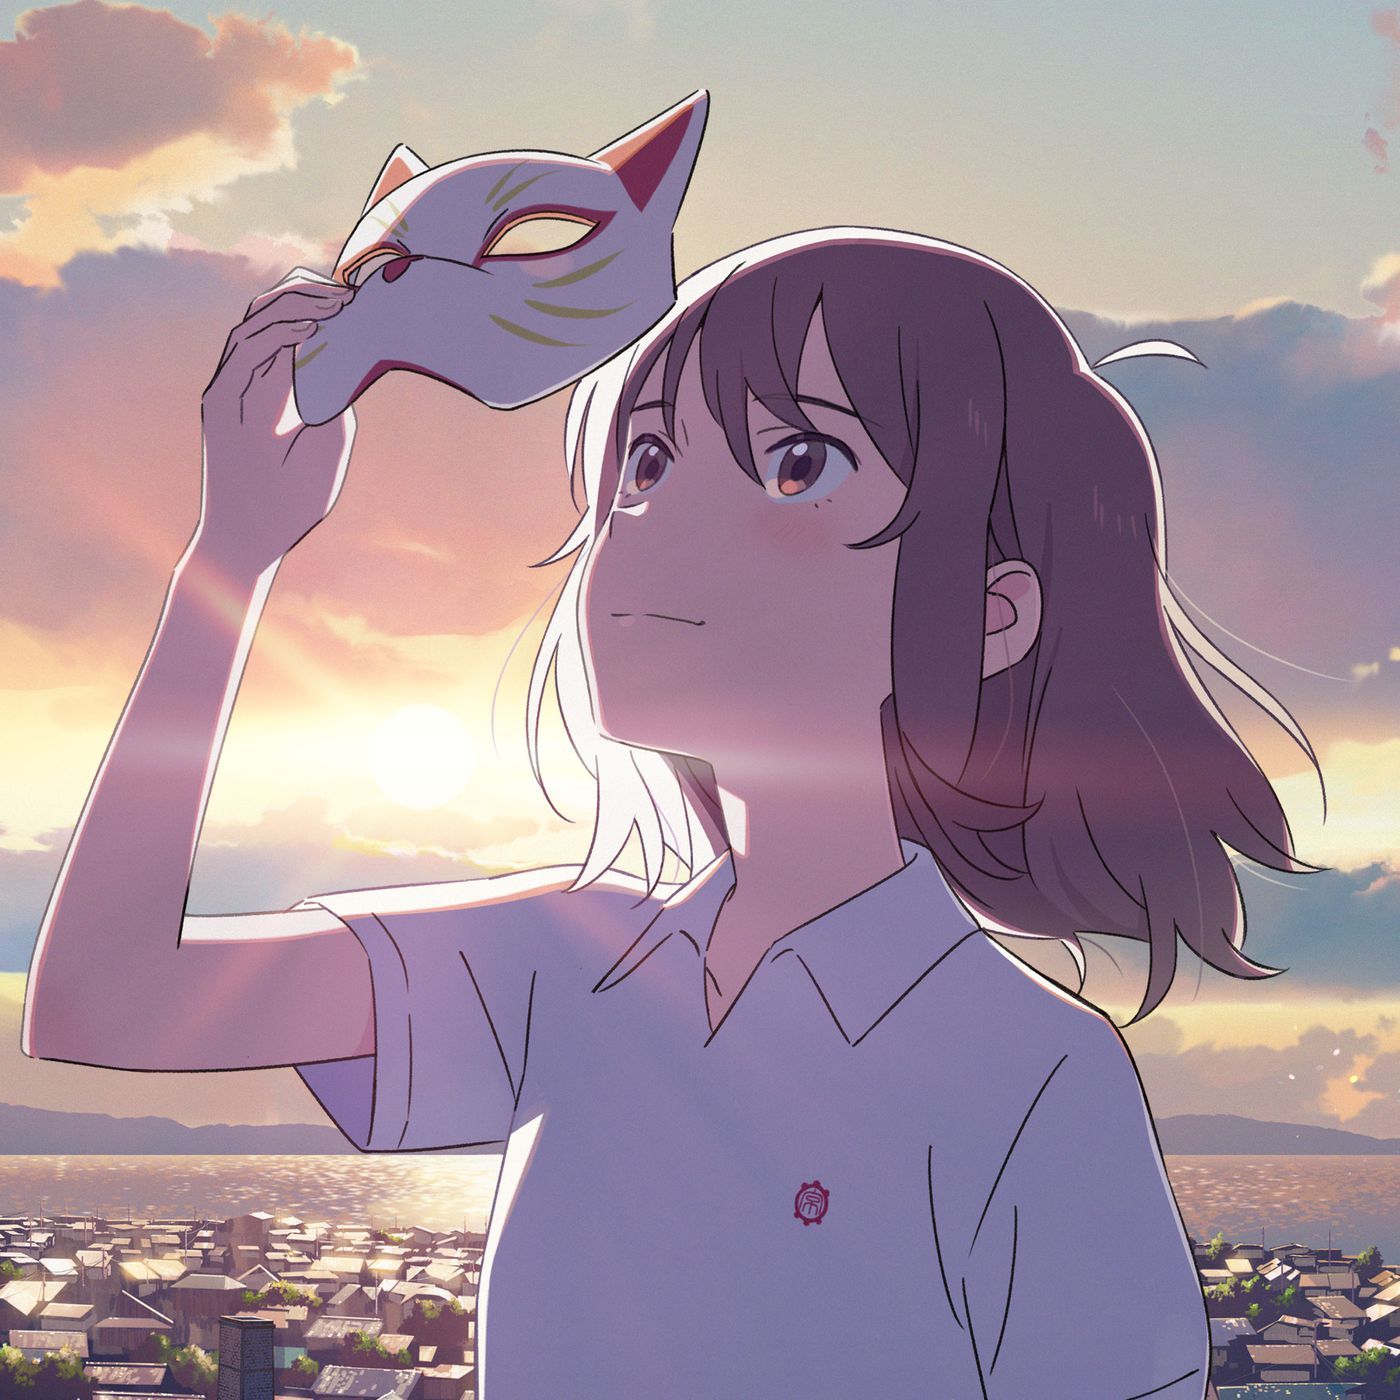 A Whisker Away review: A Netflix anime movie about cats, shapeshifting, and love